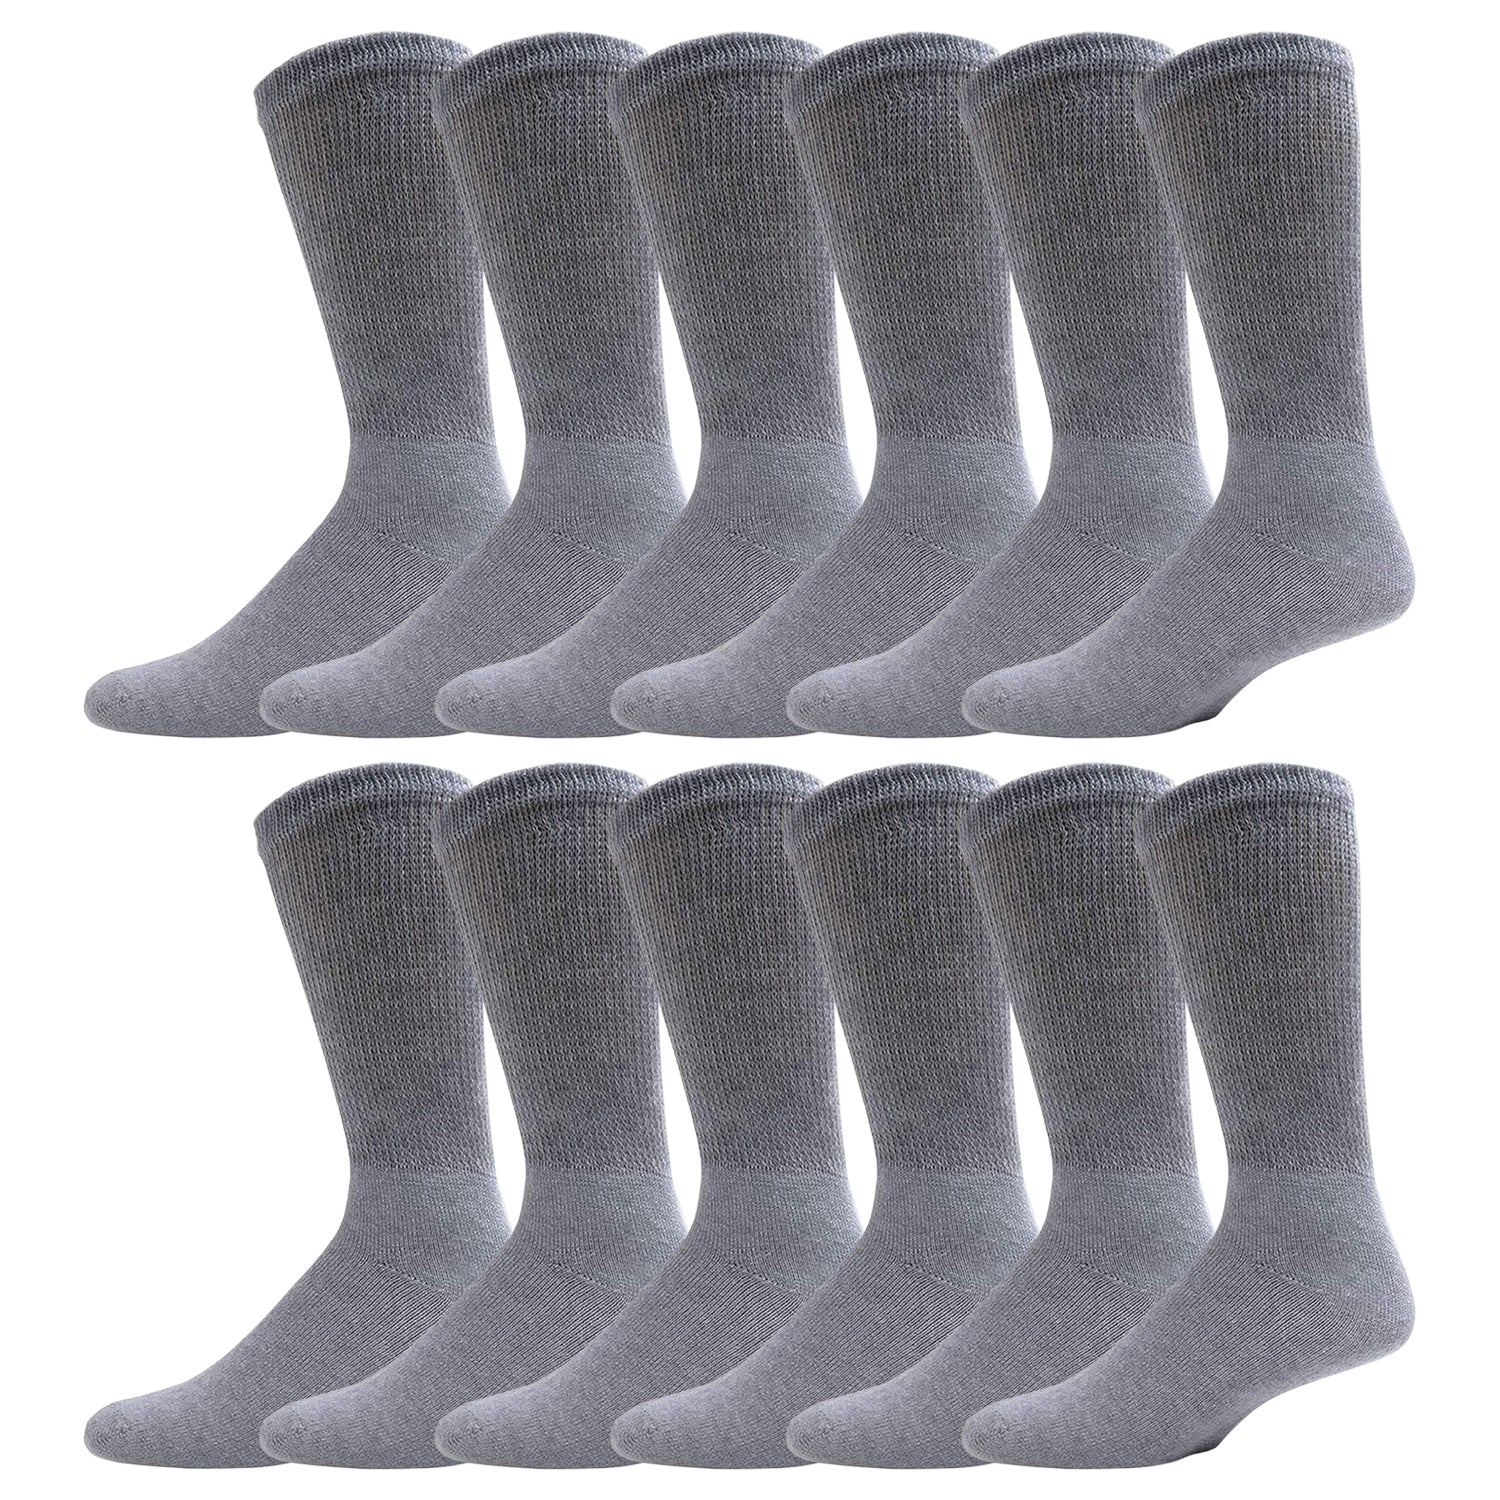 Gray Diabetic Crew Cotton Socks With Ribbed Nonbinding Top 12 Pack